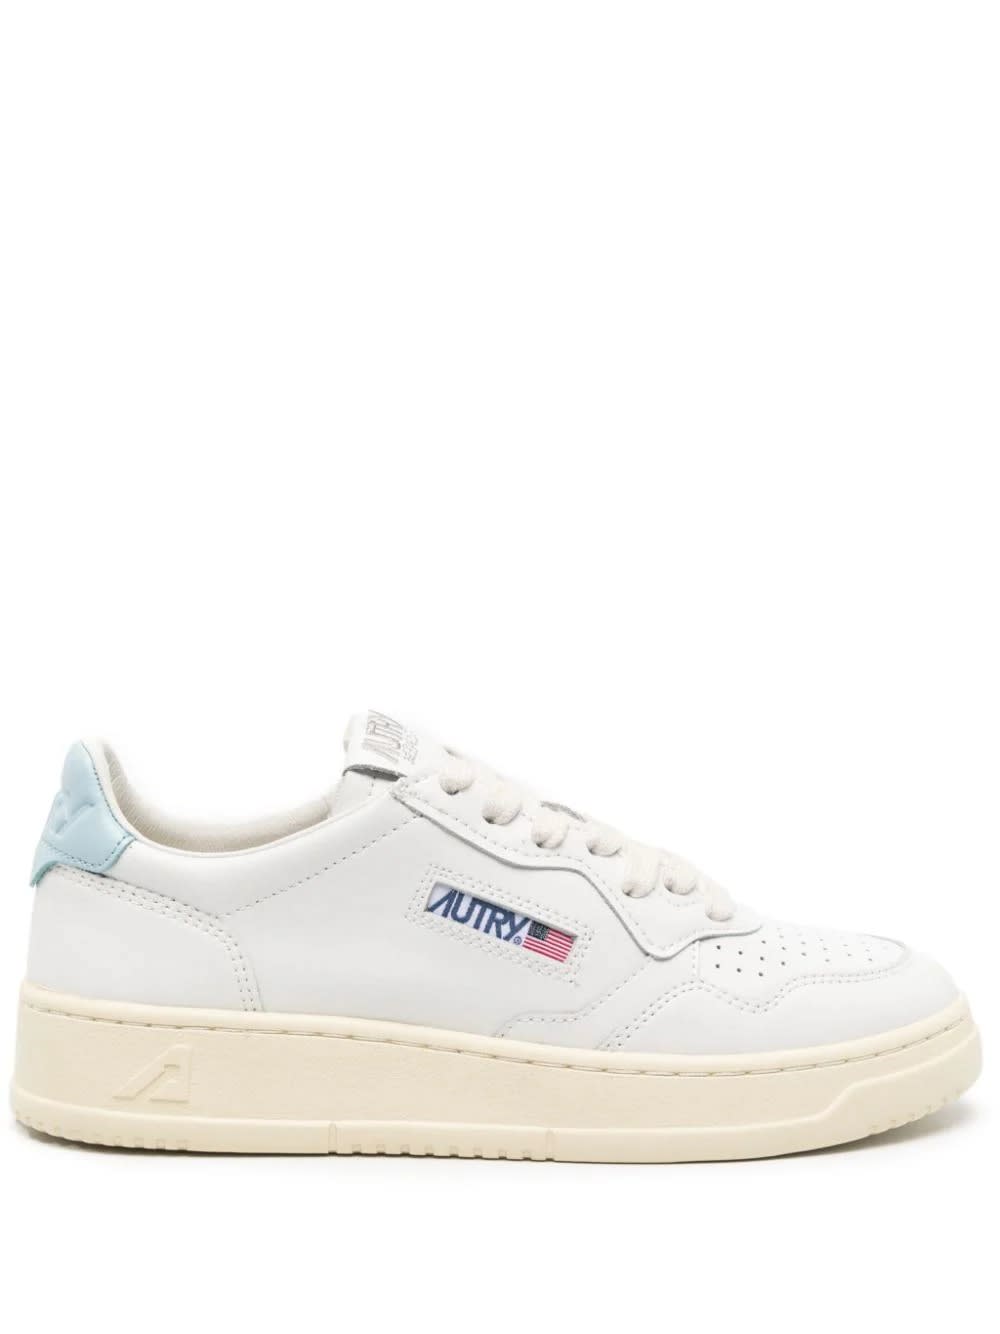 Shop Autry Medalist Low Sneakers In White And Light Blue Leather